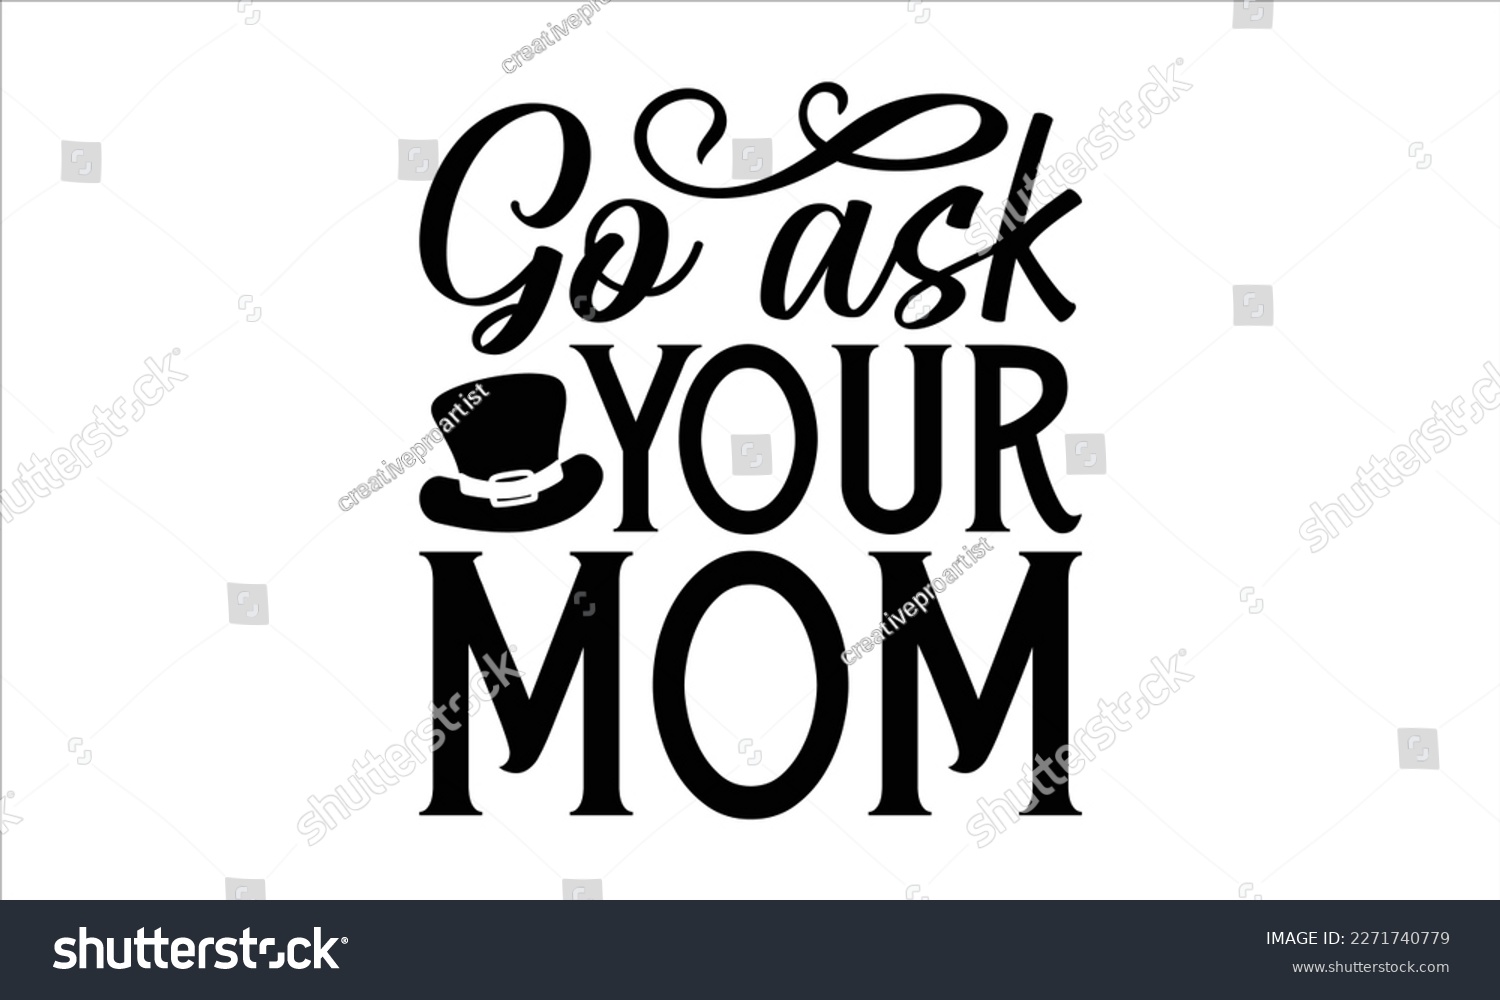 SVG of Go ask your mom- Father's Day svg design, Hand drawn lettering phrase isolated on white background, Illustration for prints on t-shirts and bags, posters, cards eps 10. svg